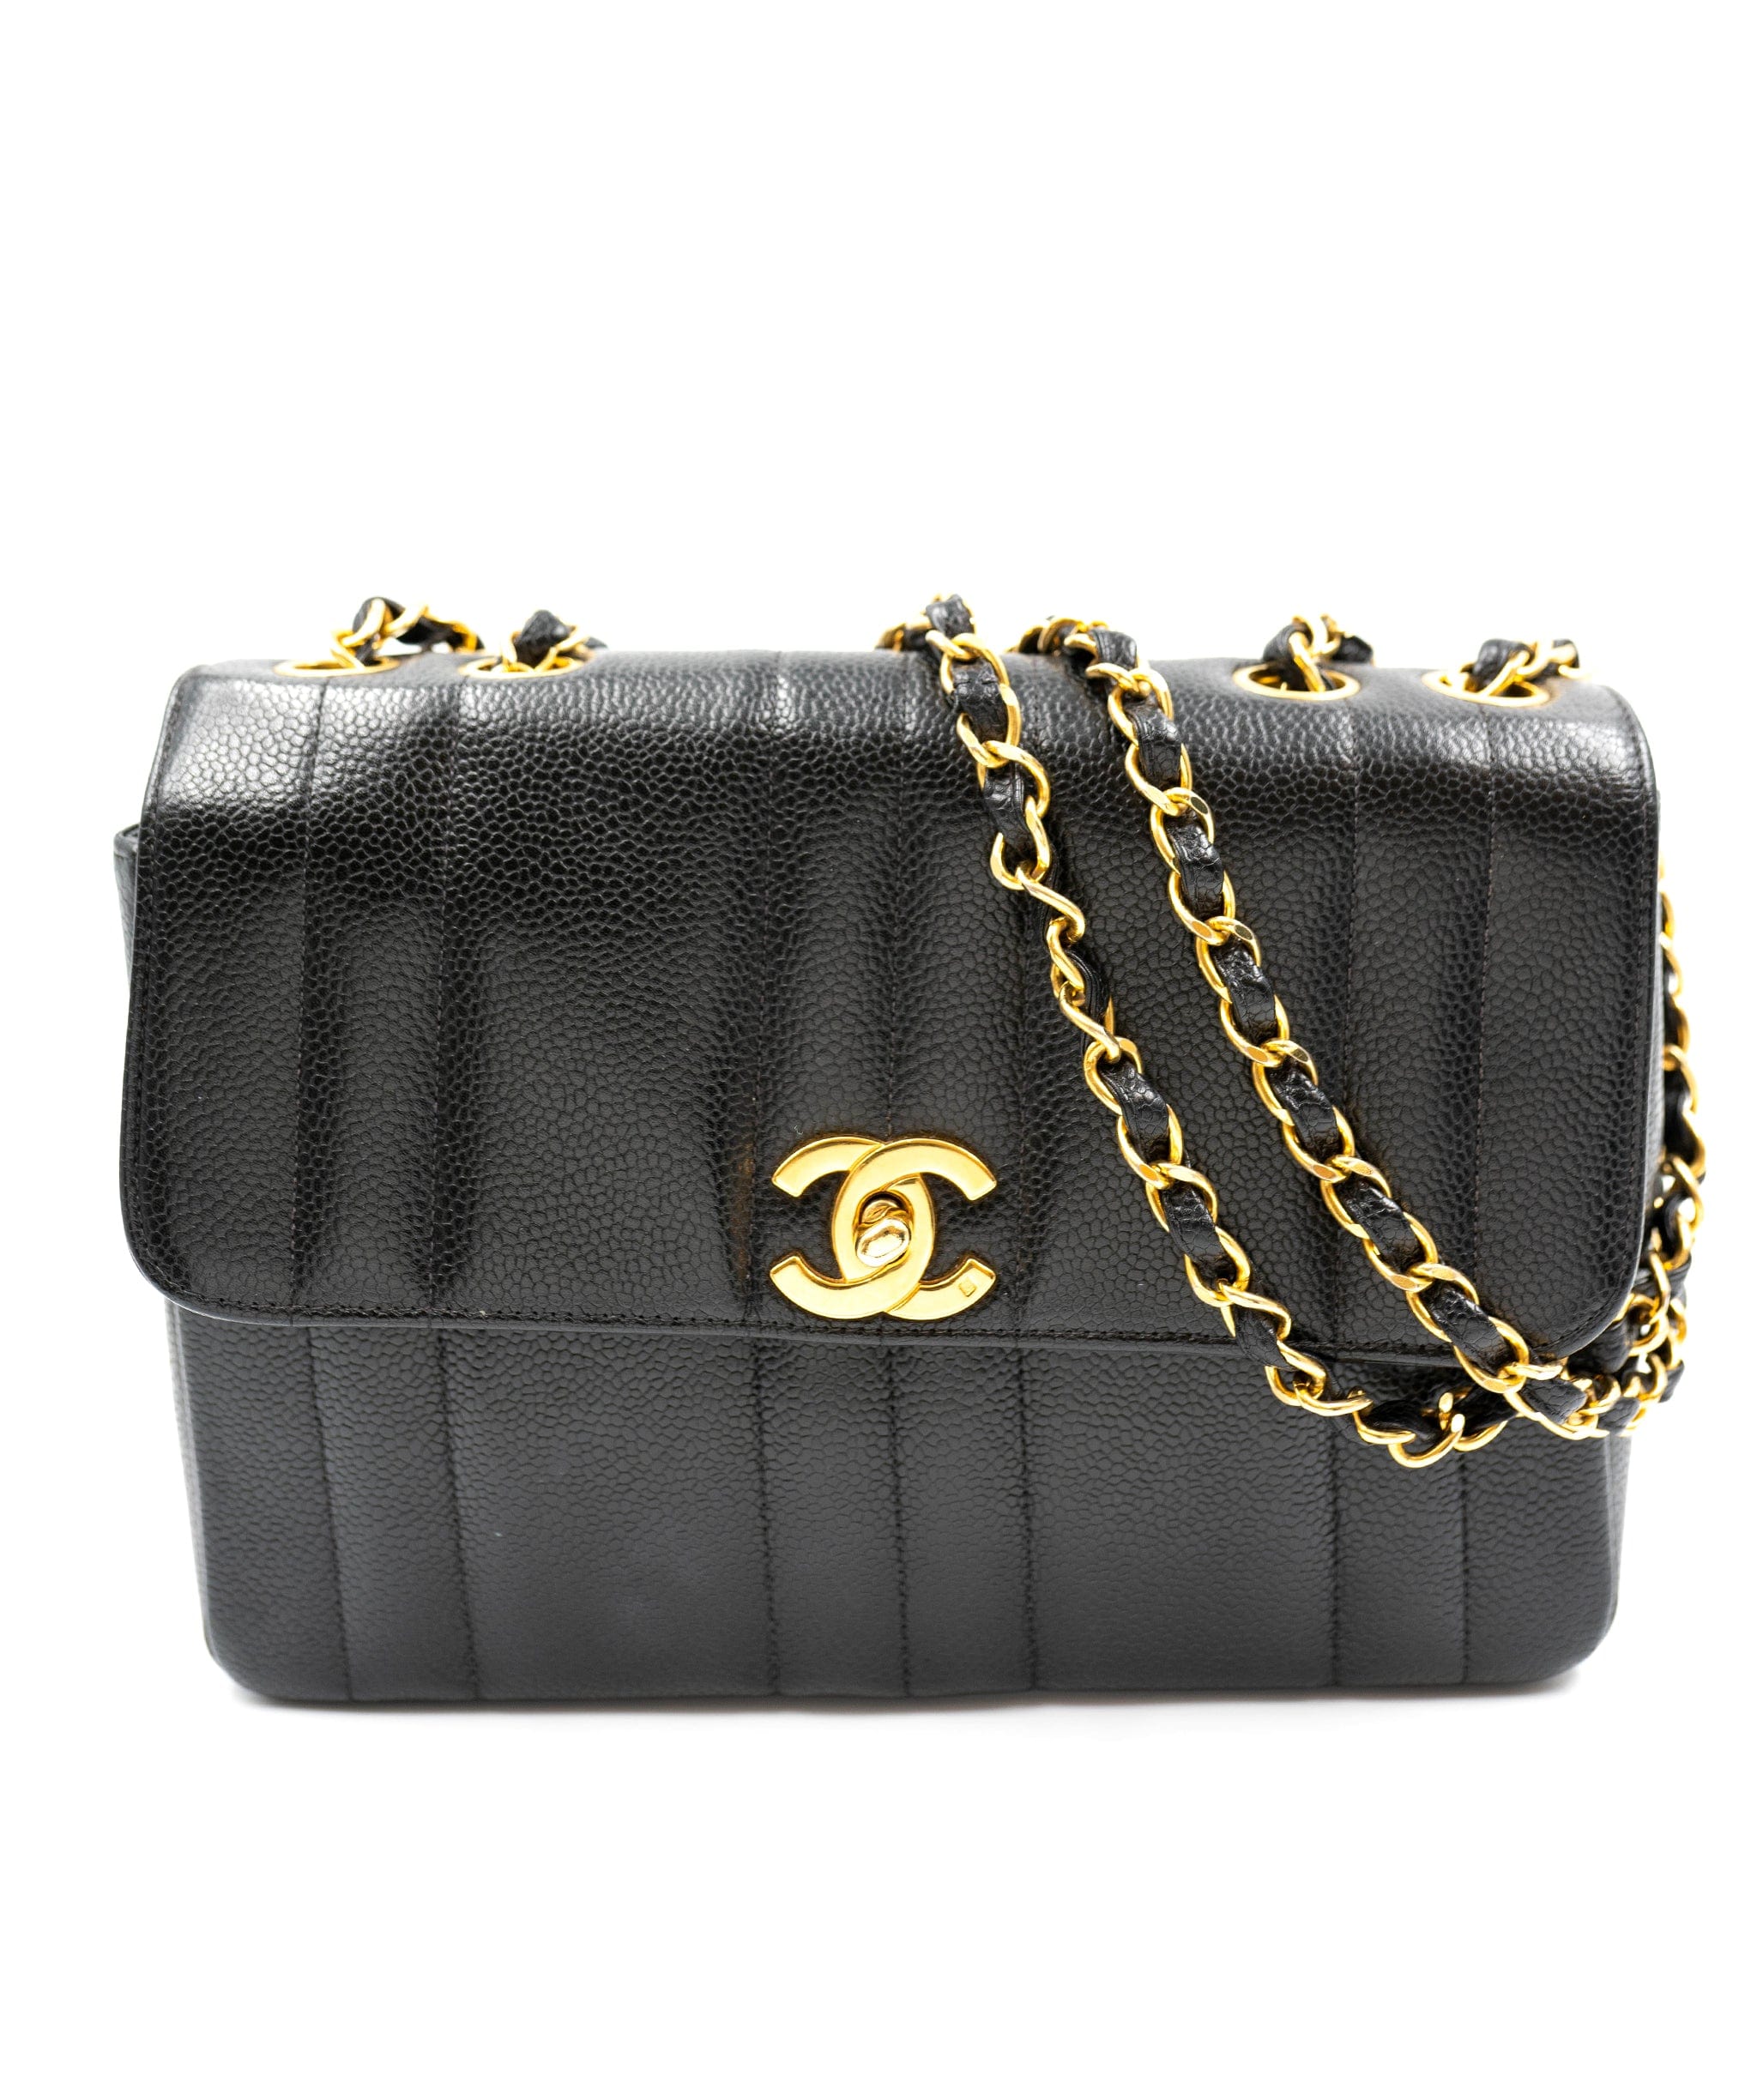 Chanel mademoiselle Square classic flap bag with Small CC logo